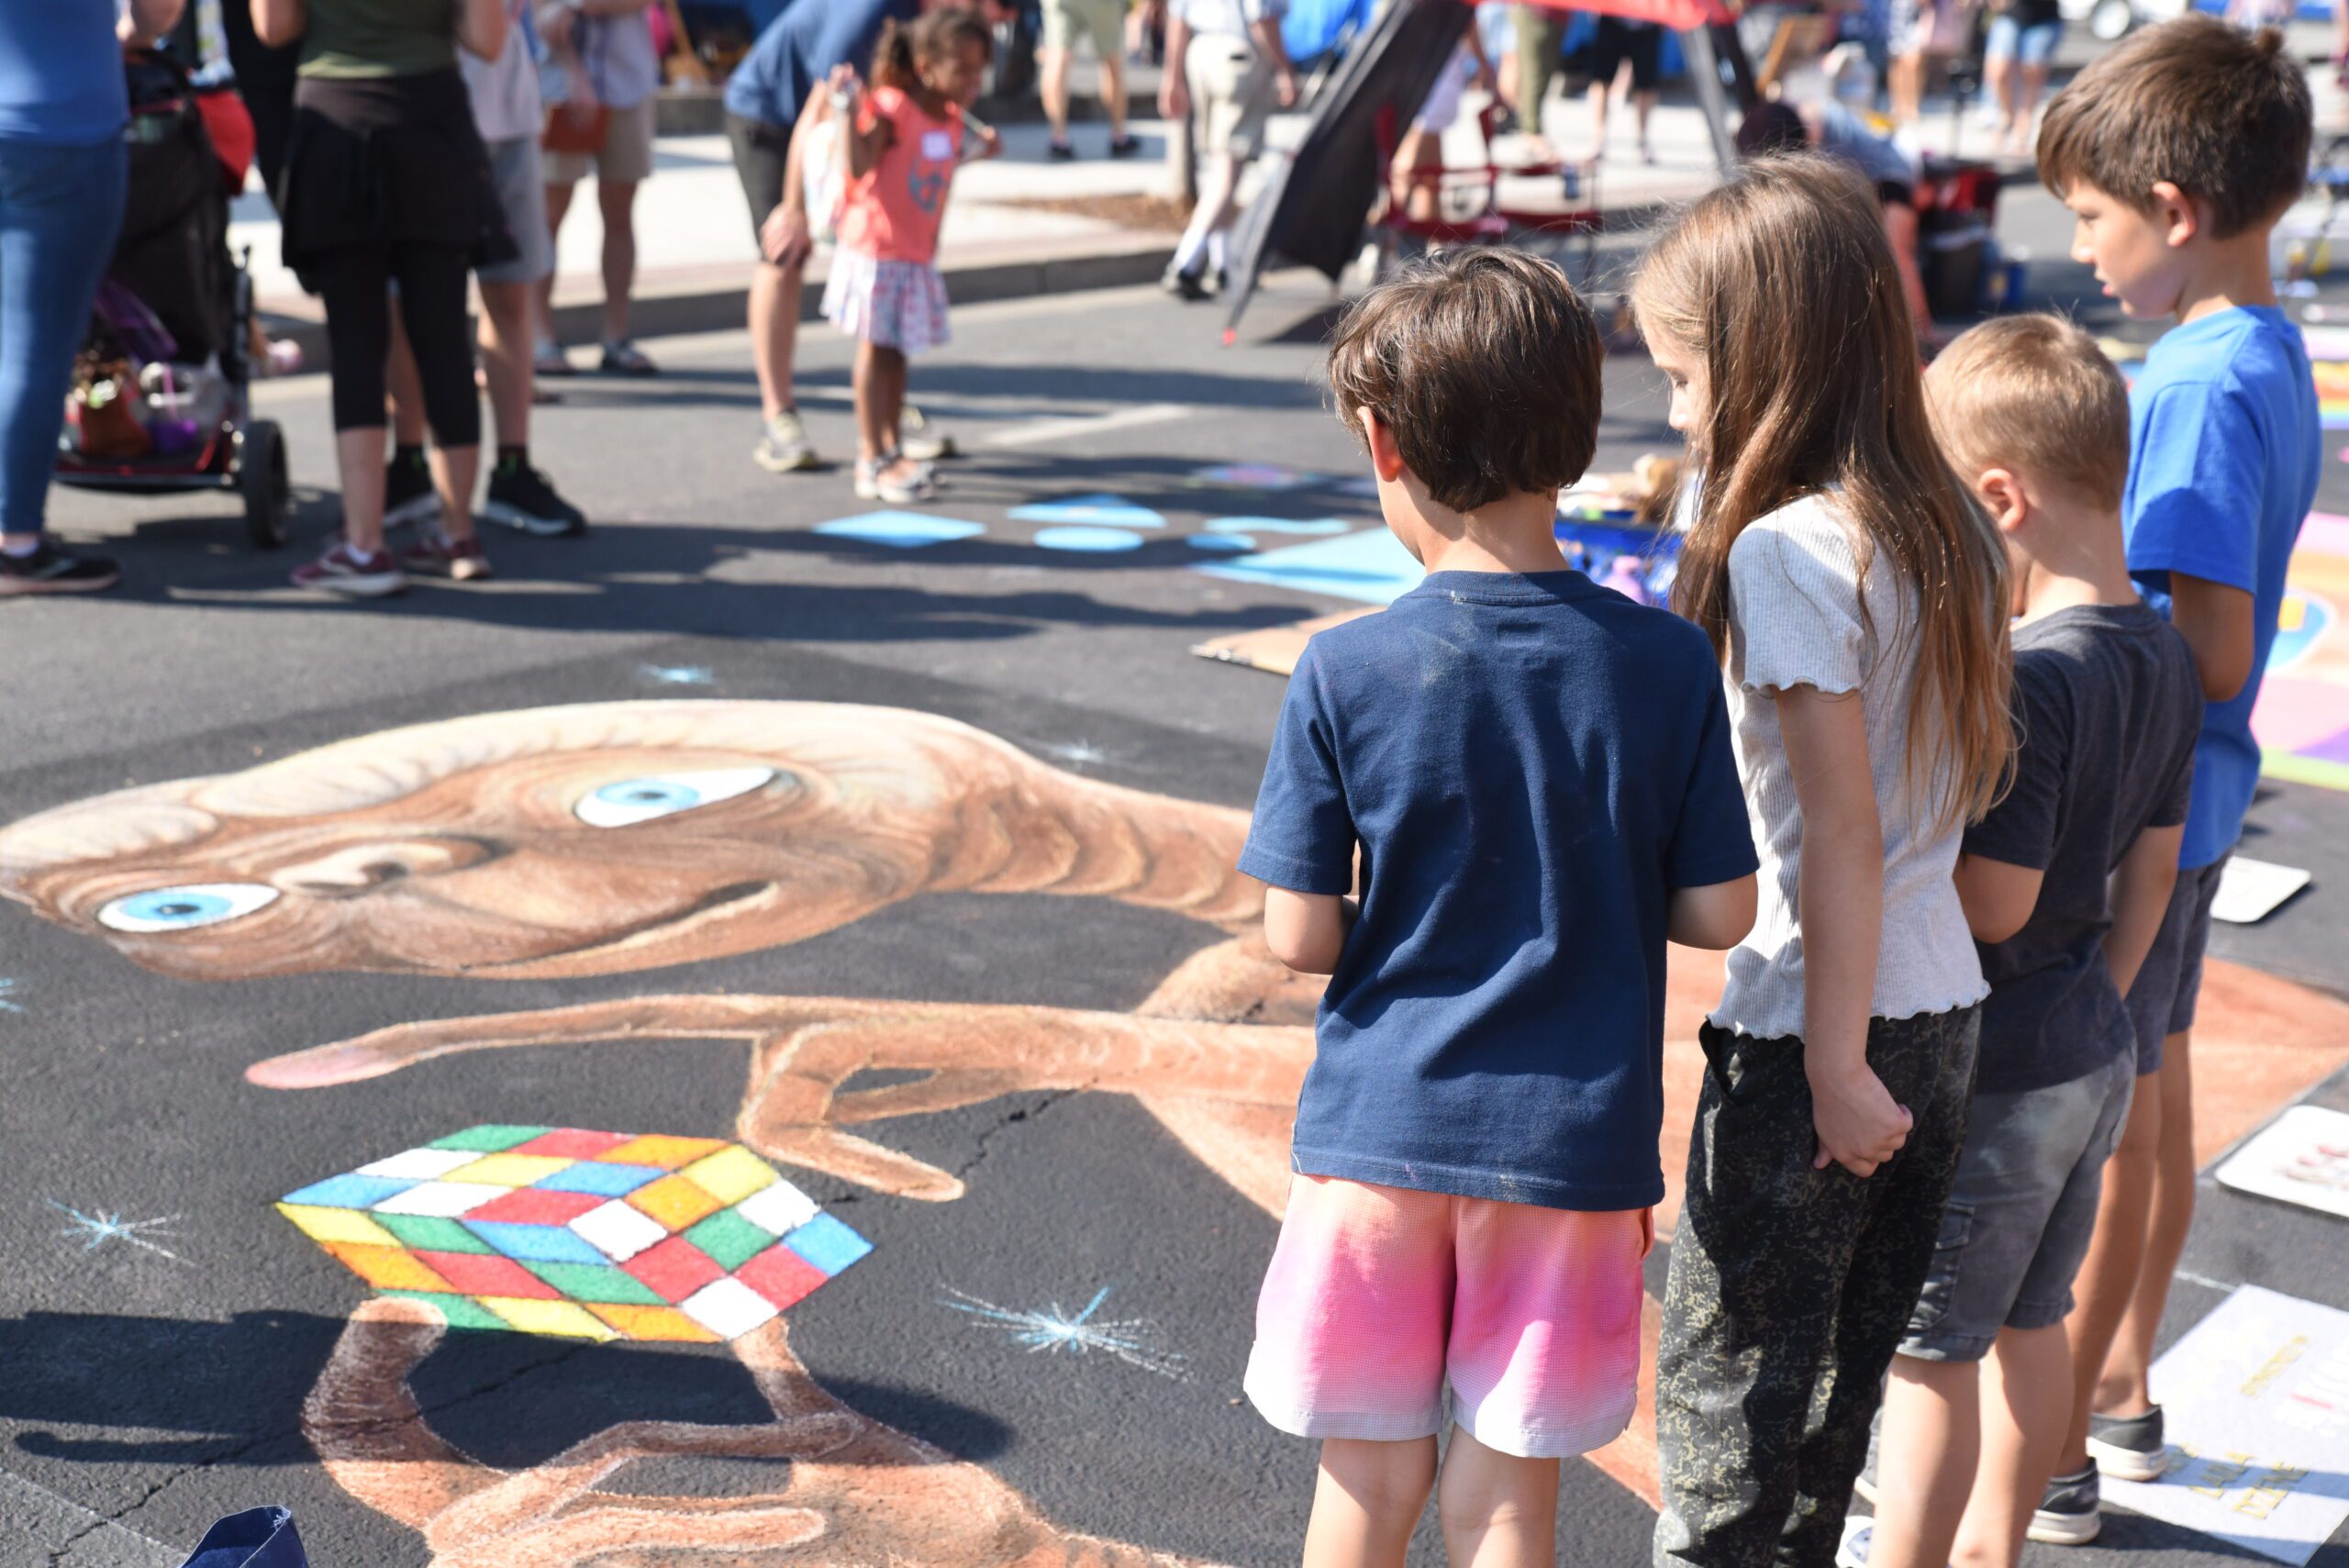 Four kids are lined up admiring the chalk art of a design of ET the alien with a rubik's cube.